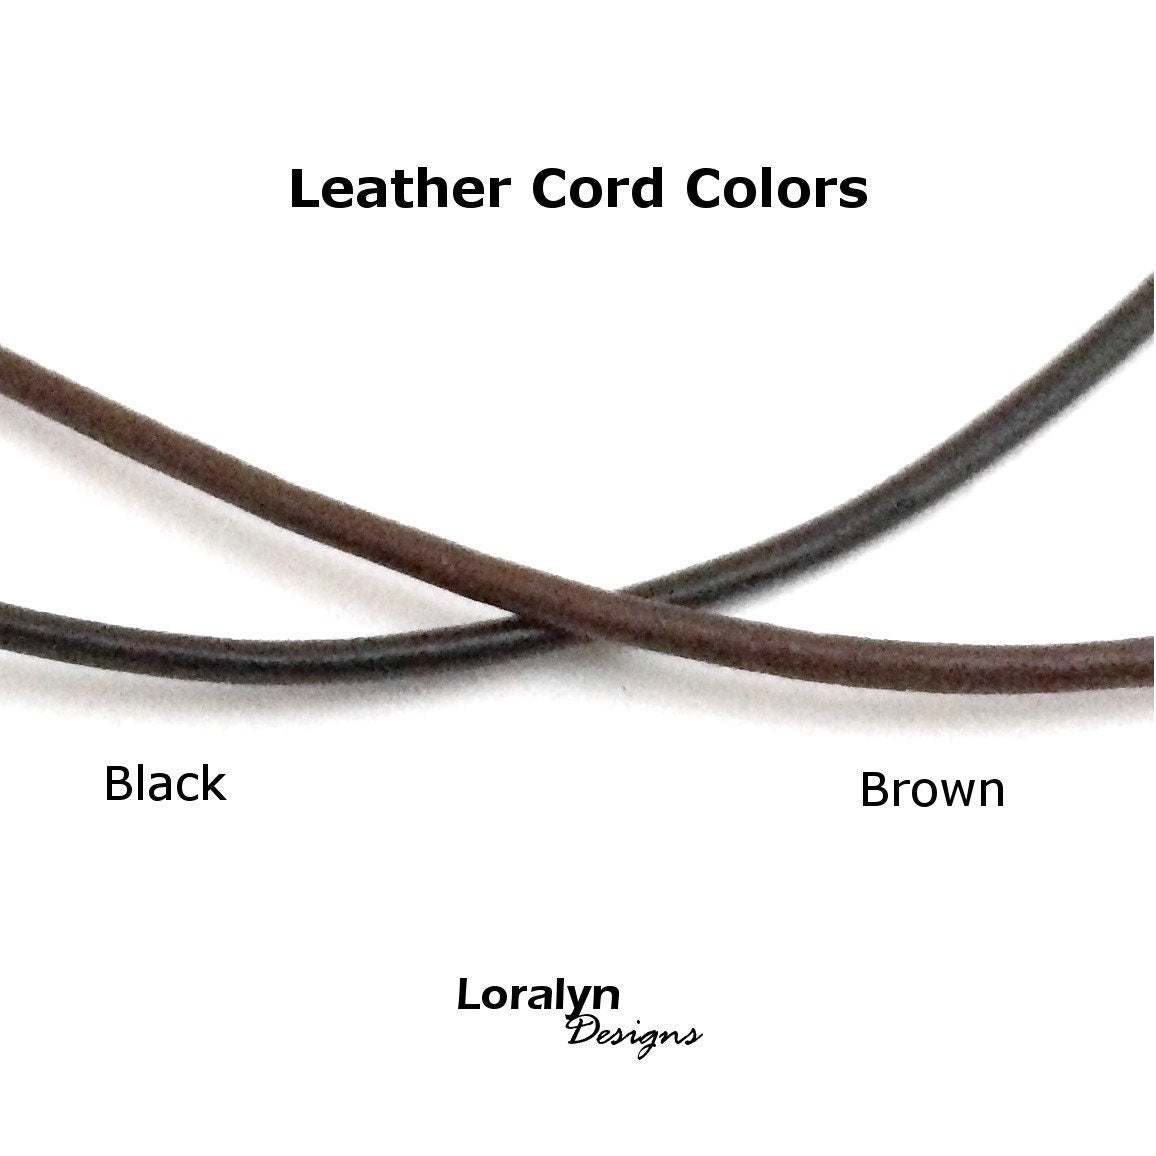 Brown Leather Cord Necklace (16 - 30 Inch), 2mm, Stainless Steel Clasp, Plain Necklace Chain, Choker